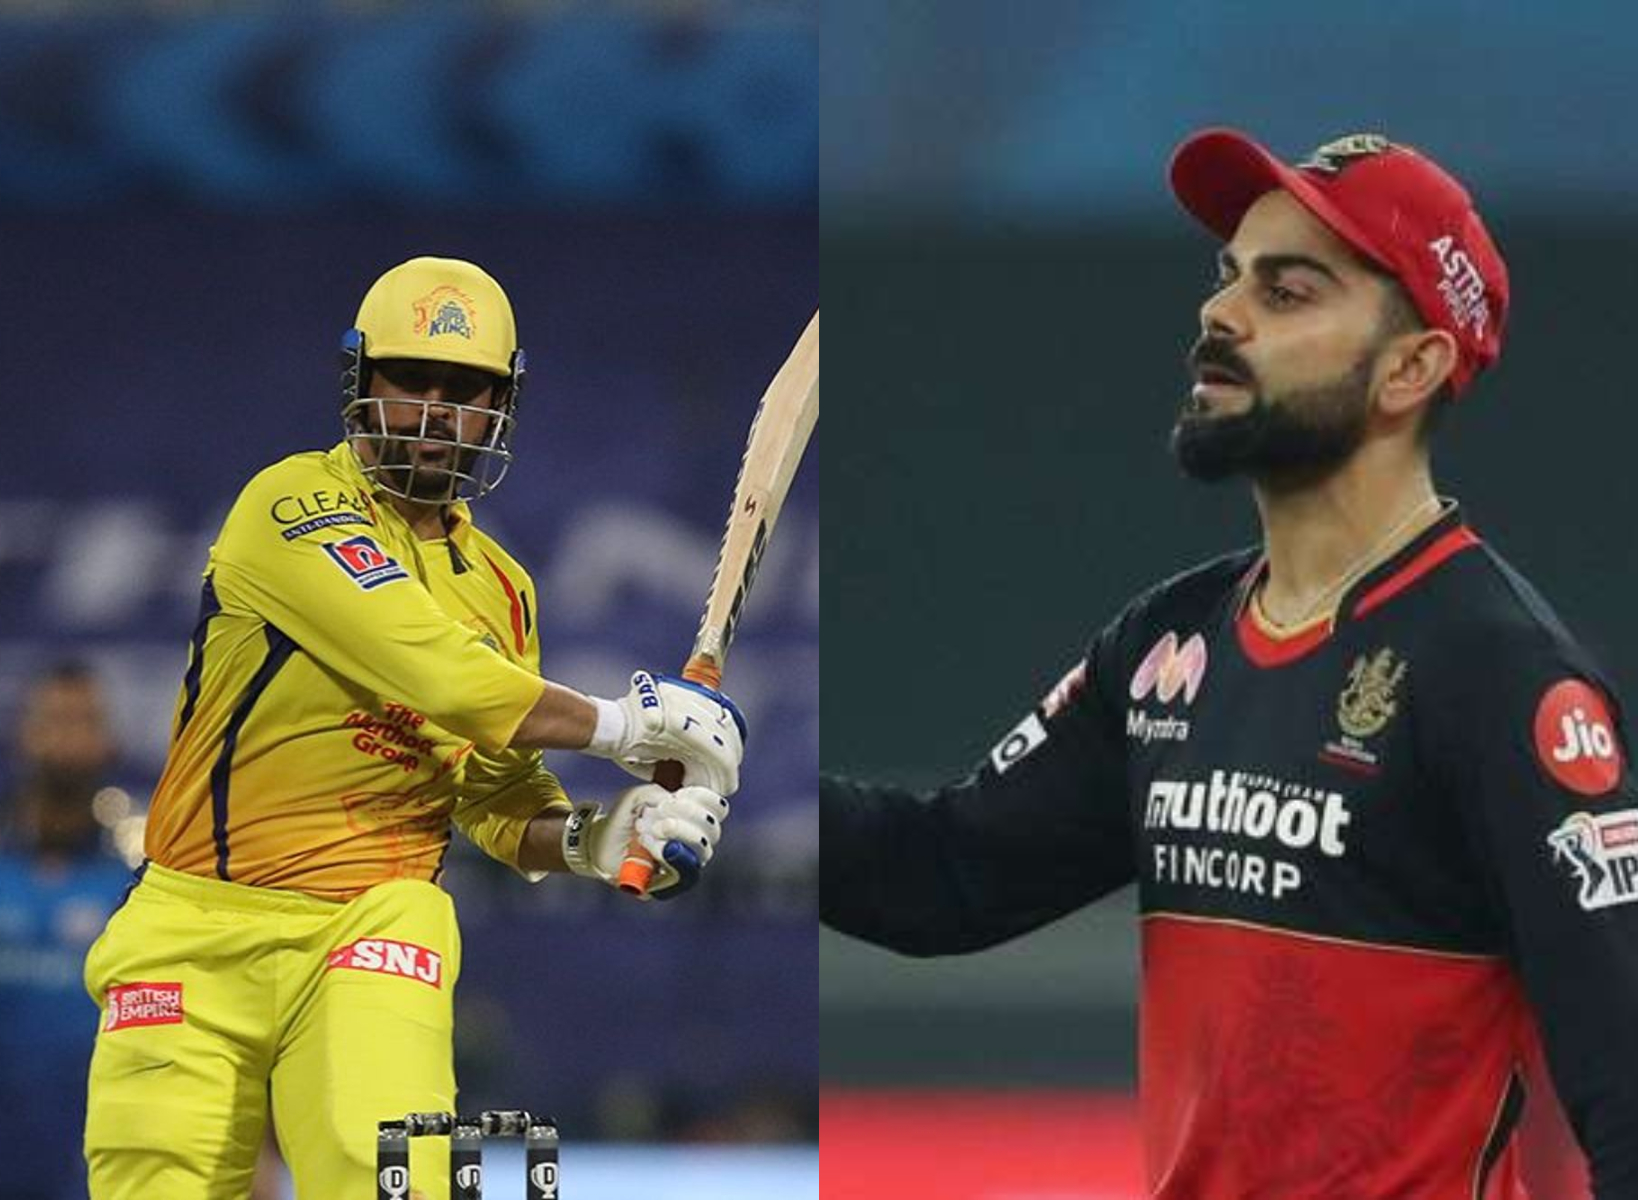 RCB has three wins from five matches, while CSK has 4 losses from 6 matches so far